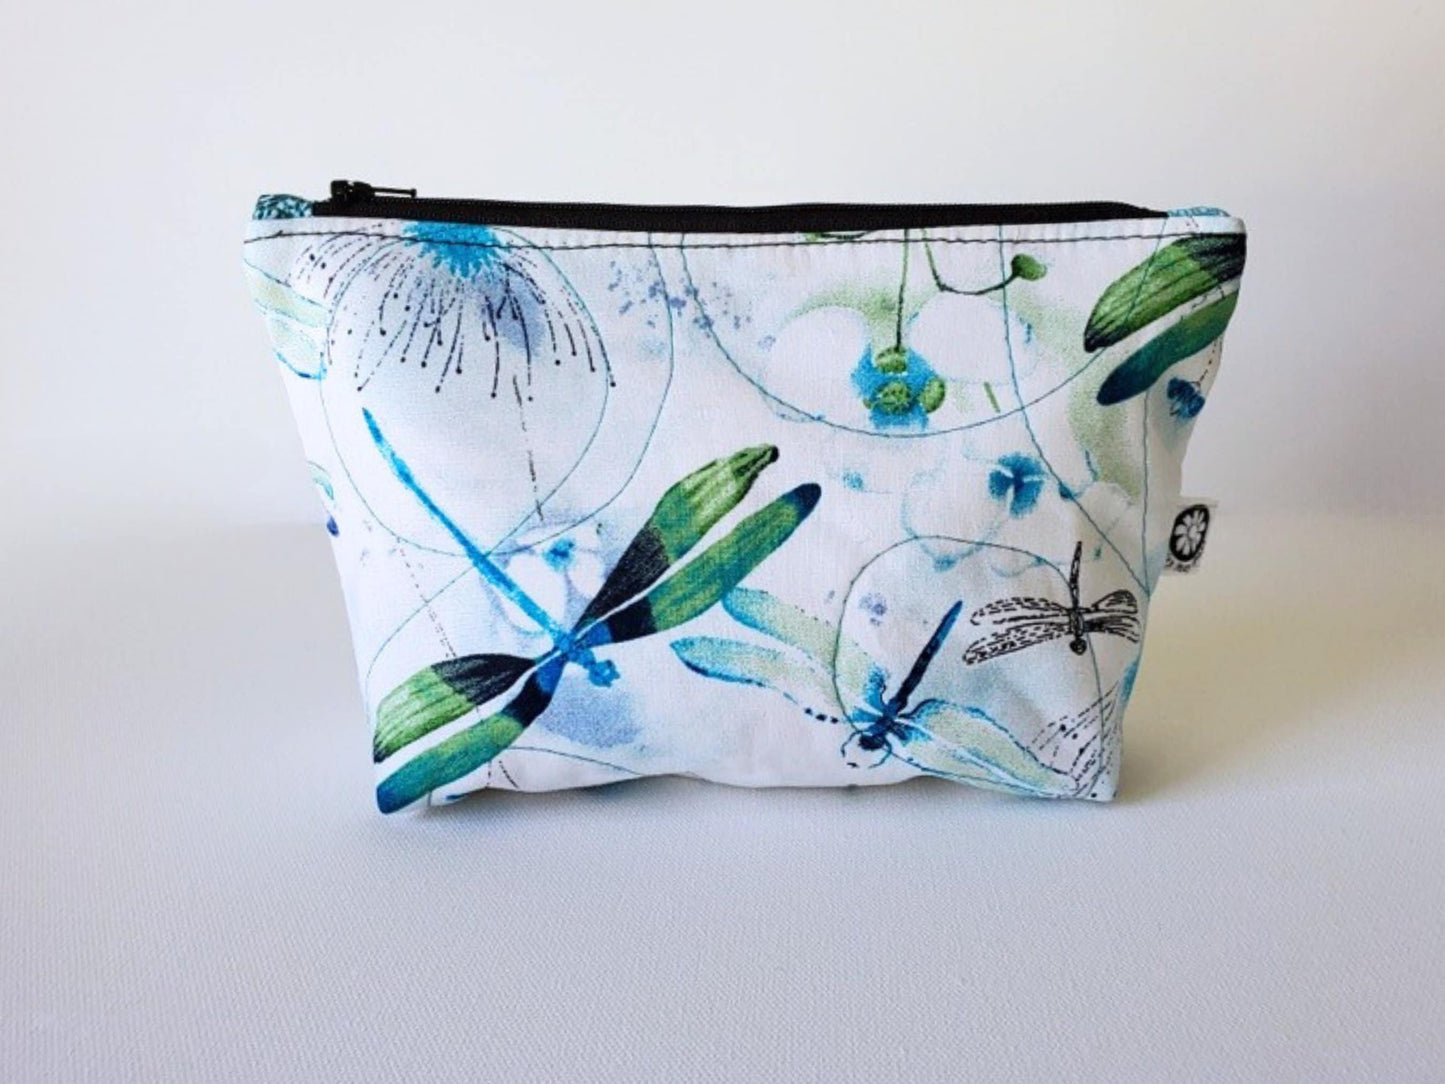 Quilted Zippered Cosmetic Bag with Watercolor Dragonflies Print - Lined, Blues and Greens